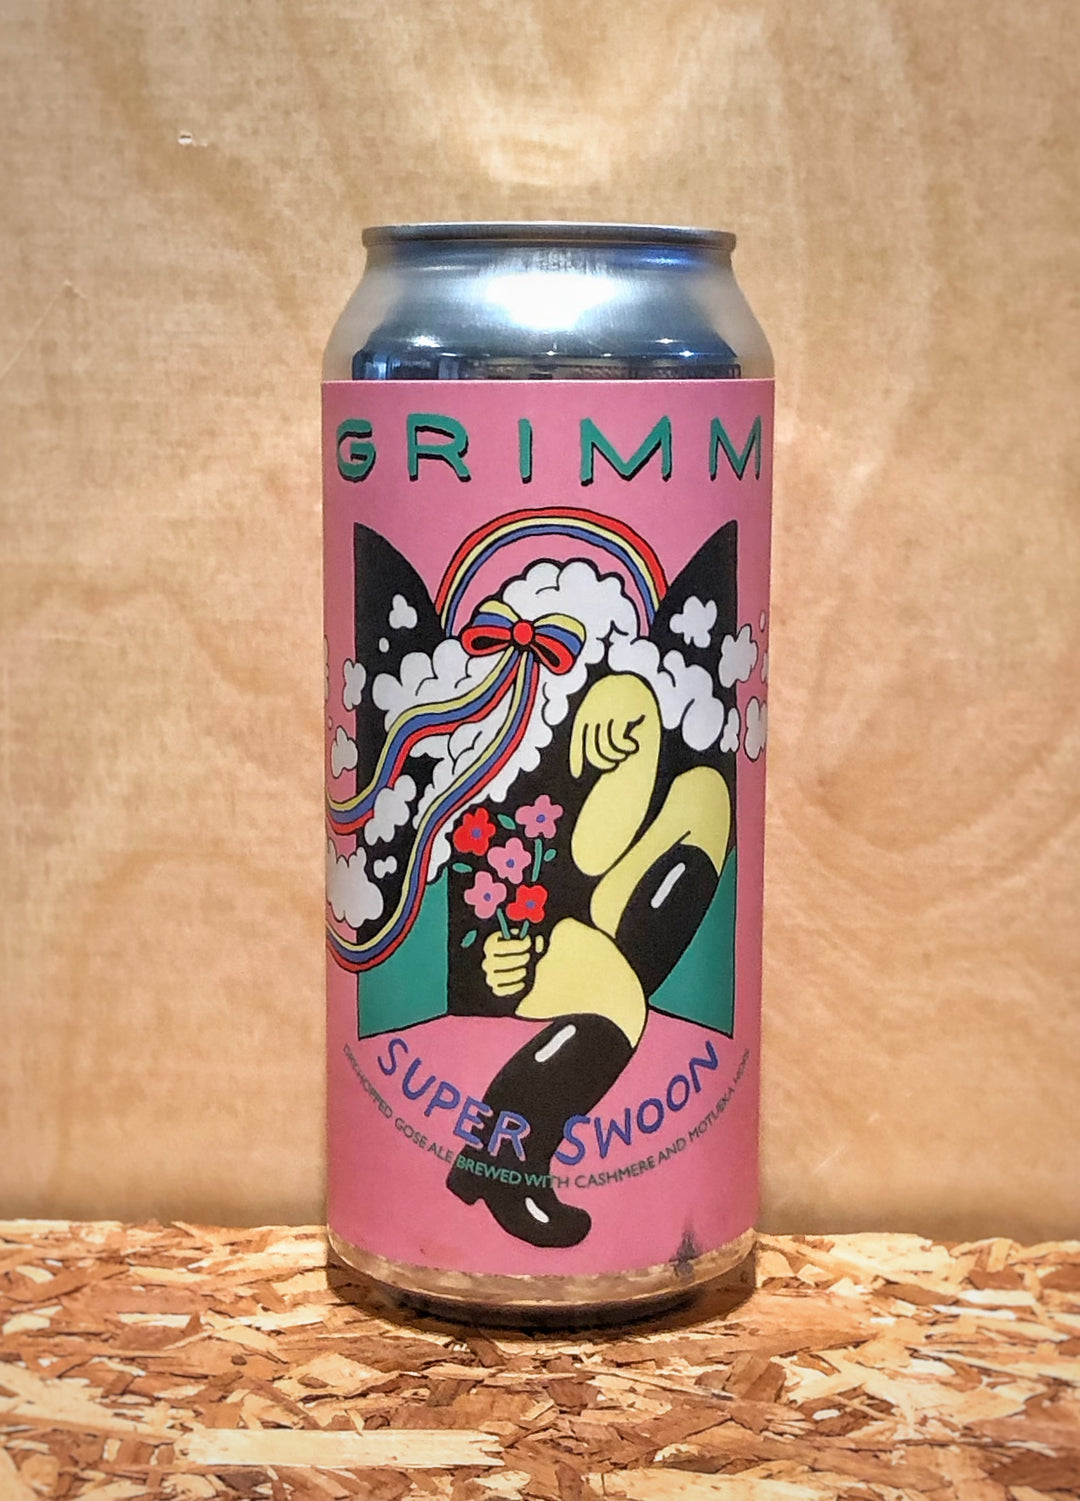 Grimm 'Super Swoon' Dry-Hopped Gose Ale brewed with Cashmere and Motueka Hops (Brooklyn, NY)